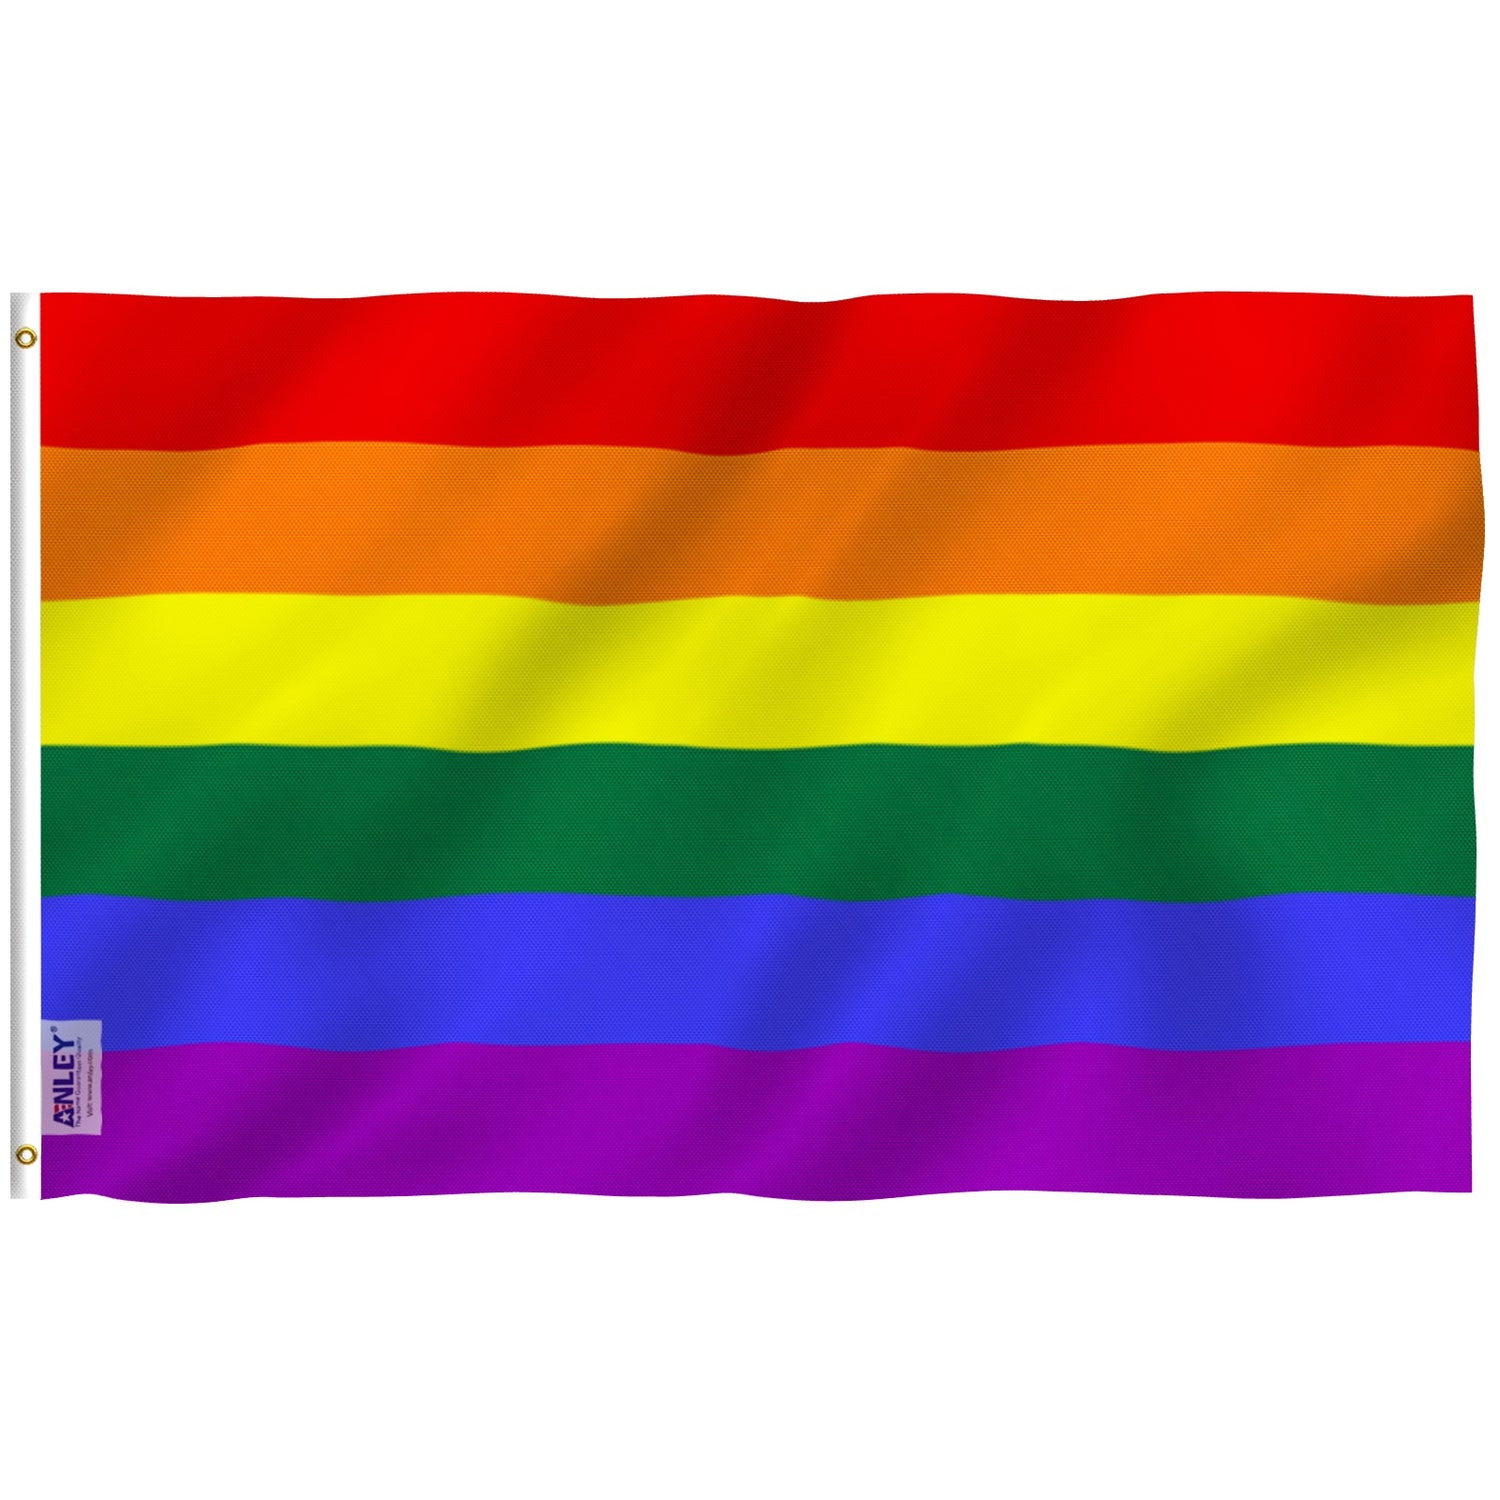 Free Pride Flags - Add to Cart for 100% Discount